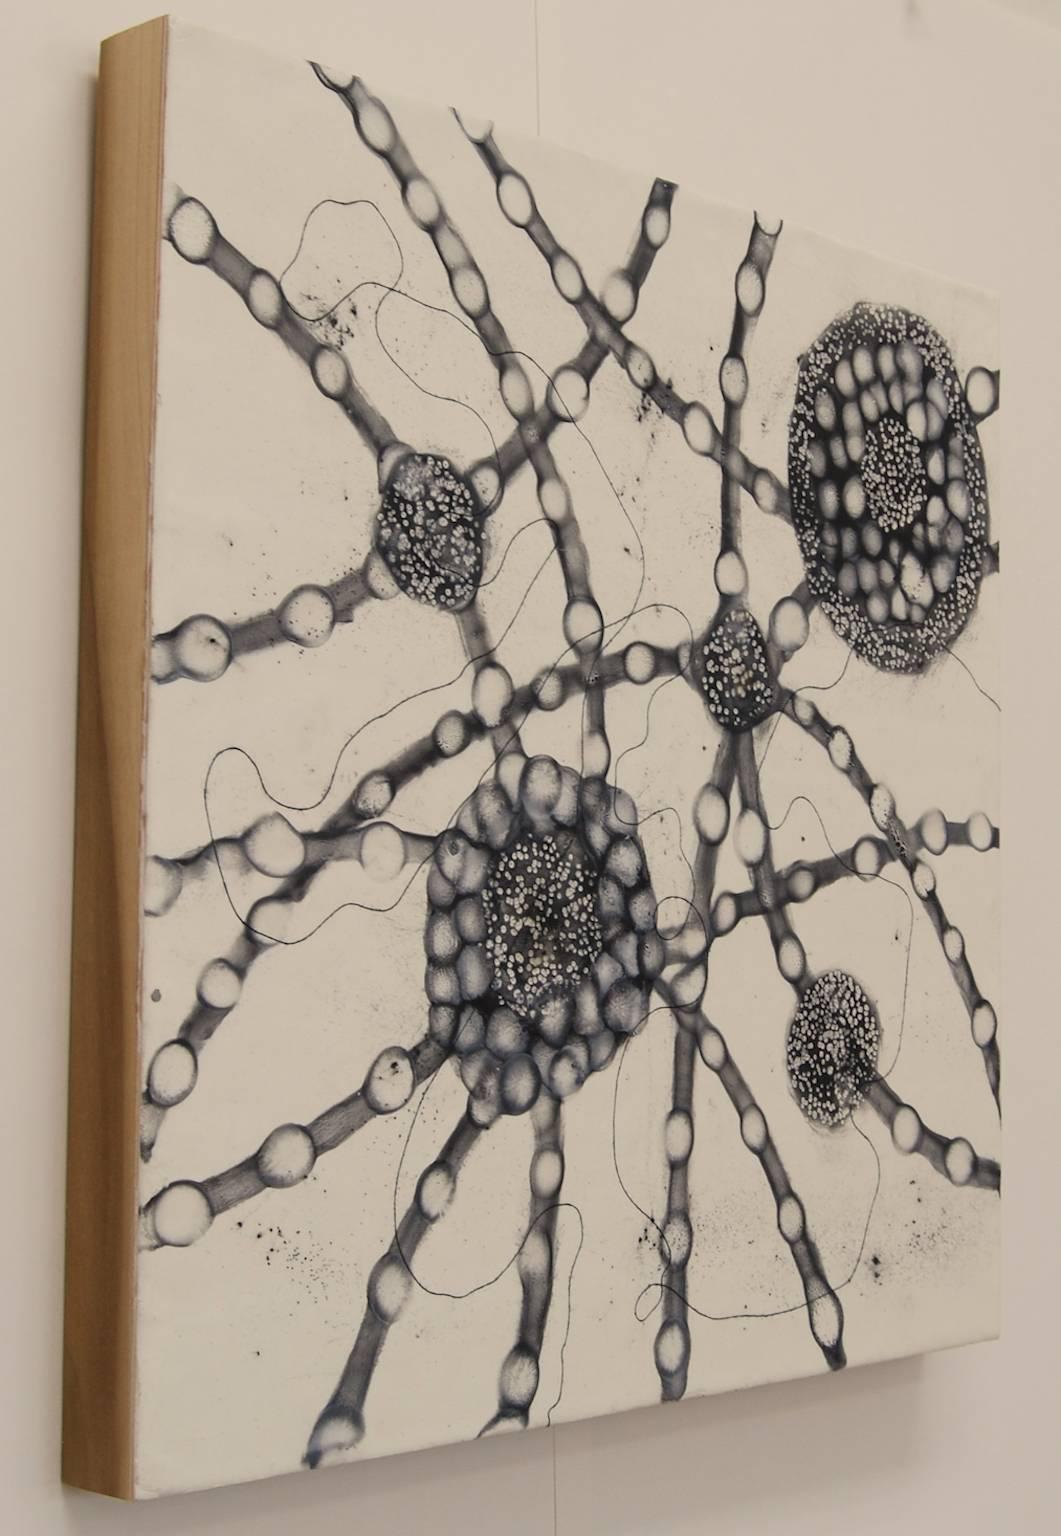 Kay Hartung's “Cells Alive 6” is a striking representation of microscopic activity in black and white. Using powdered graphite on white encaustic, she creates the imagery by moving the graphite around the surface with a small torch. The painting is